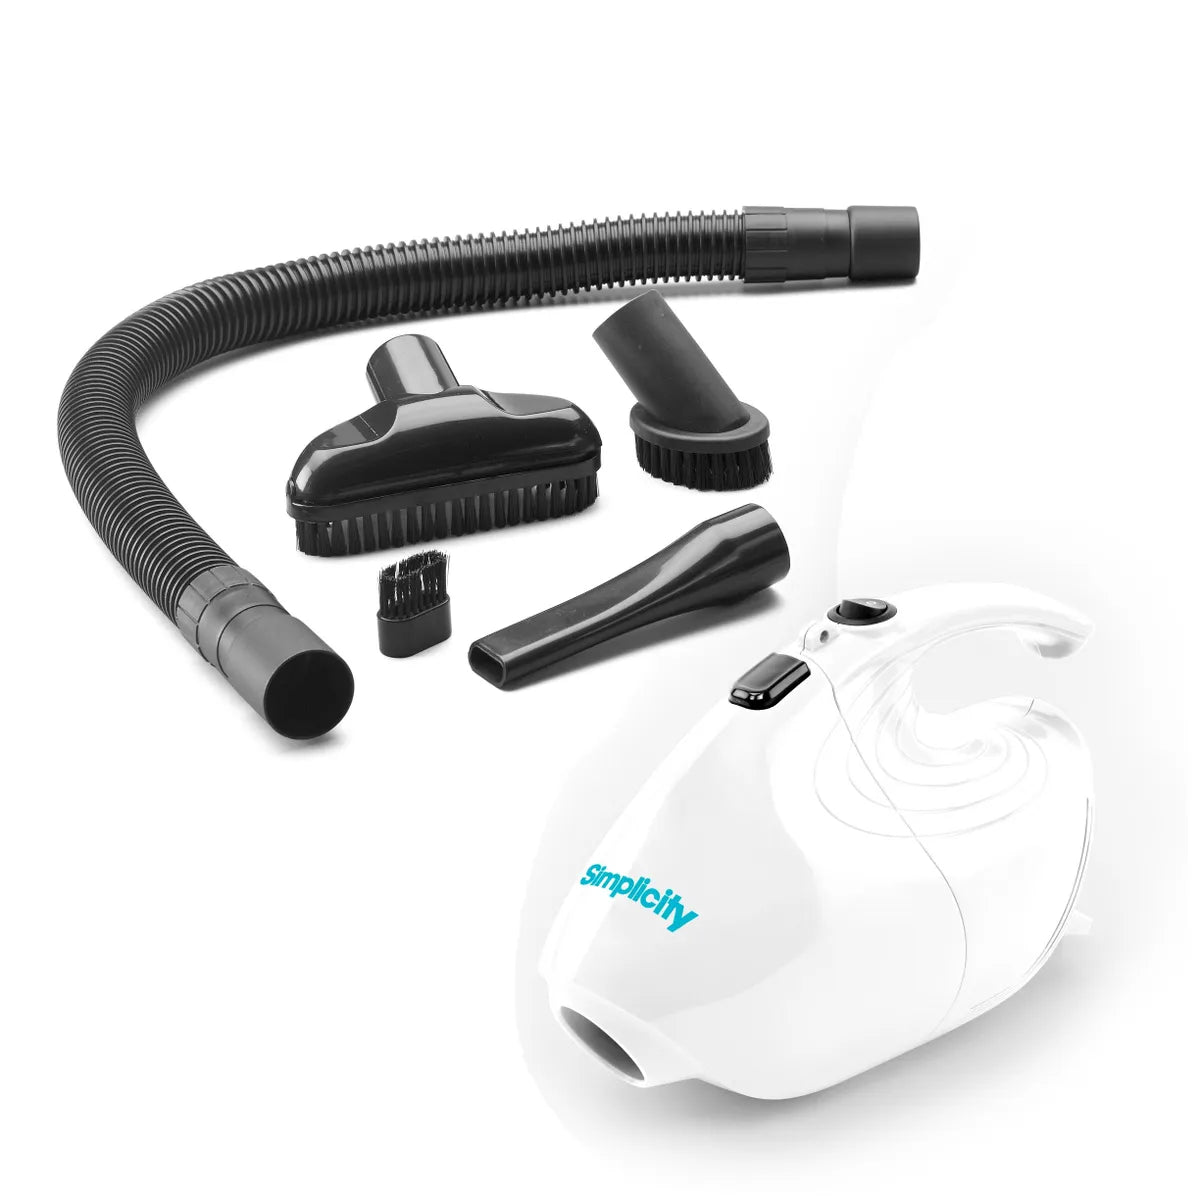 Simplicity Flash Electric Handheld Vacuum With Tool Attachments